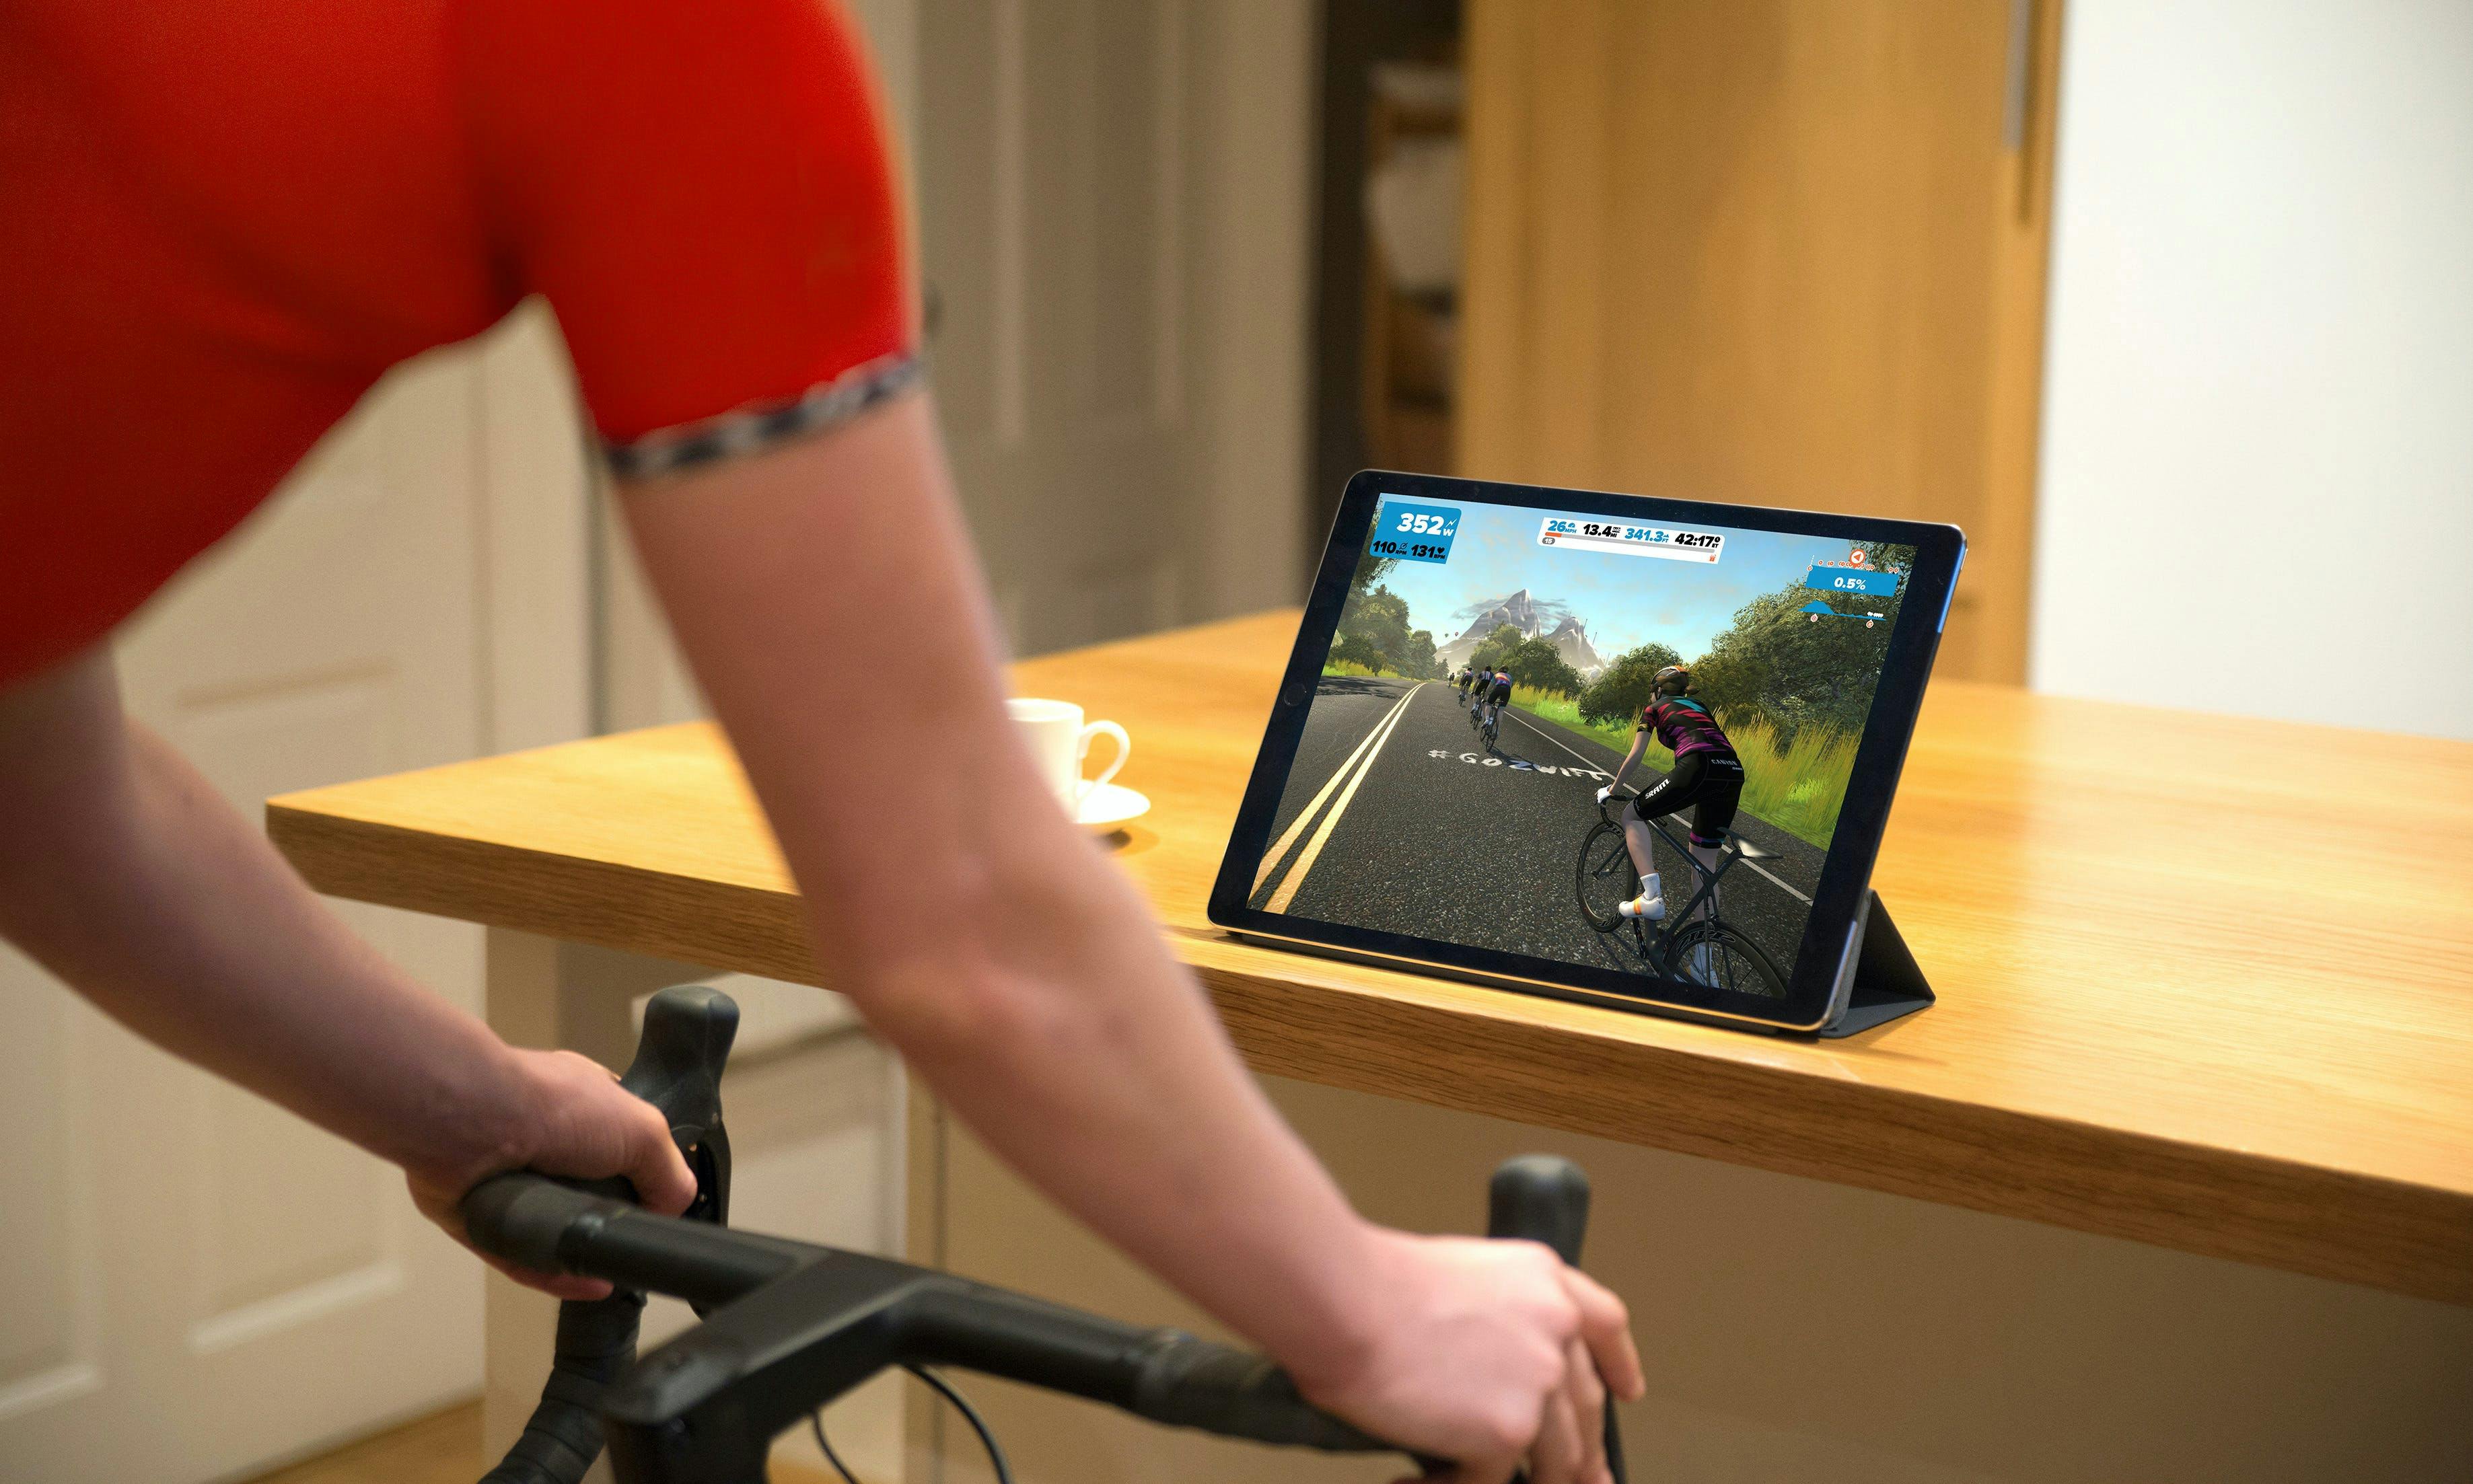 Person riding indoor trainer with Zwift